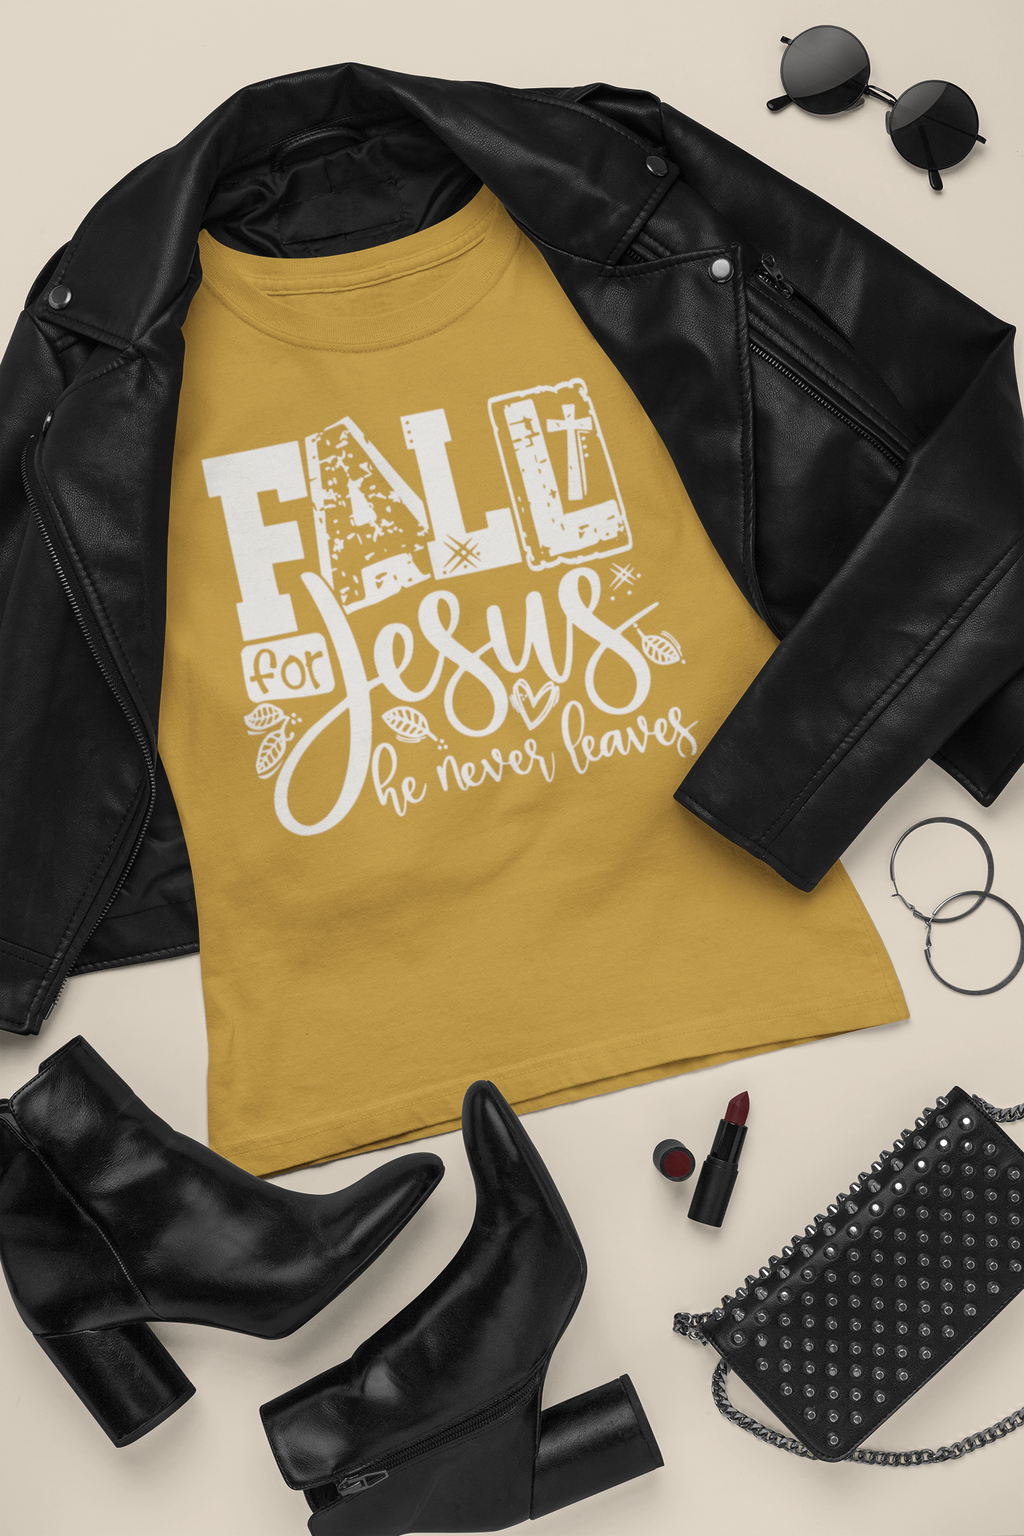 outfit-mockup-featuring-a-t-shirt-surrounded-by-dark-leather-girly-garments-26395 (2)